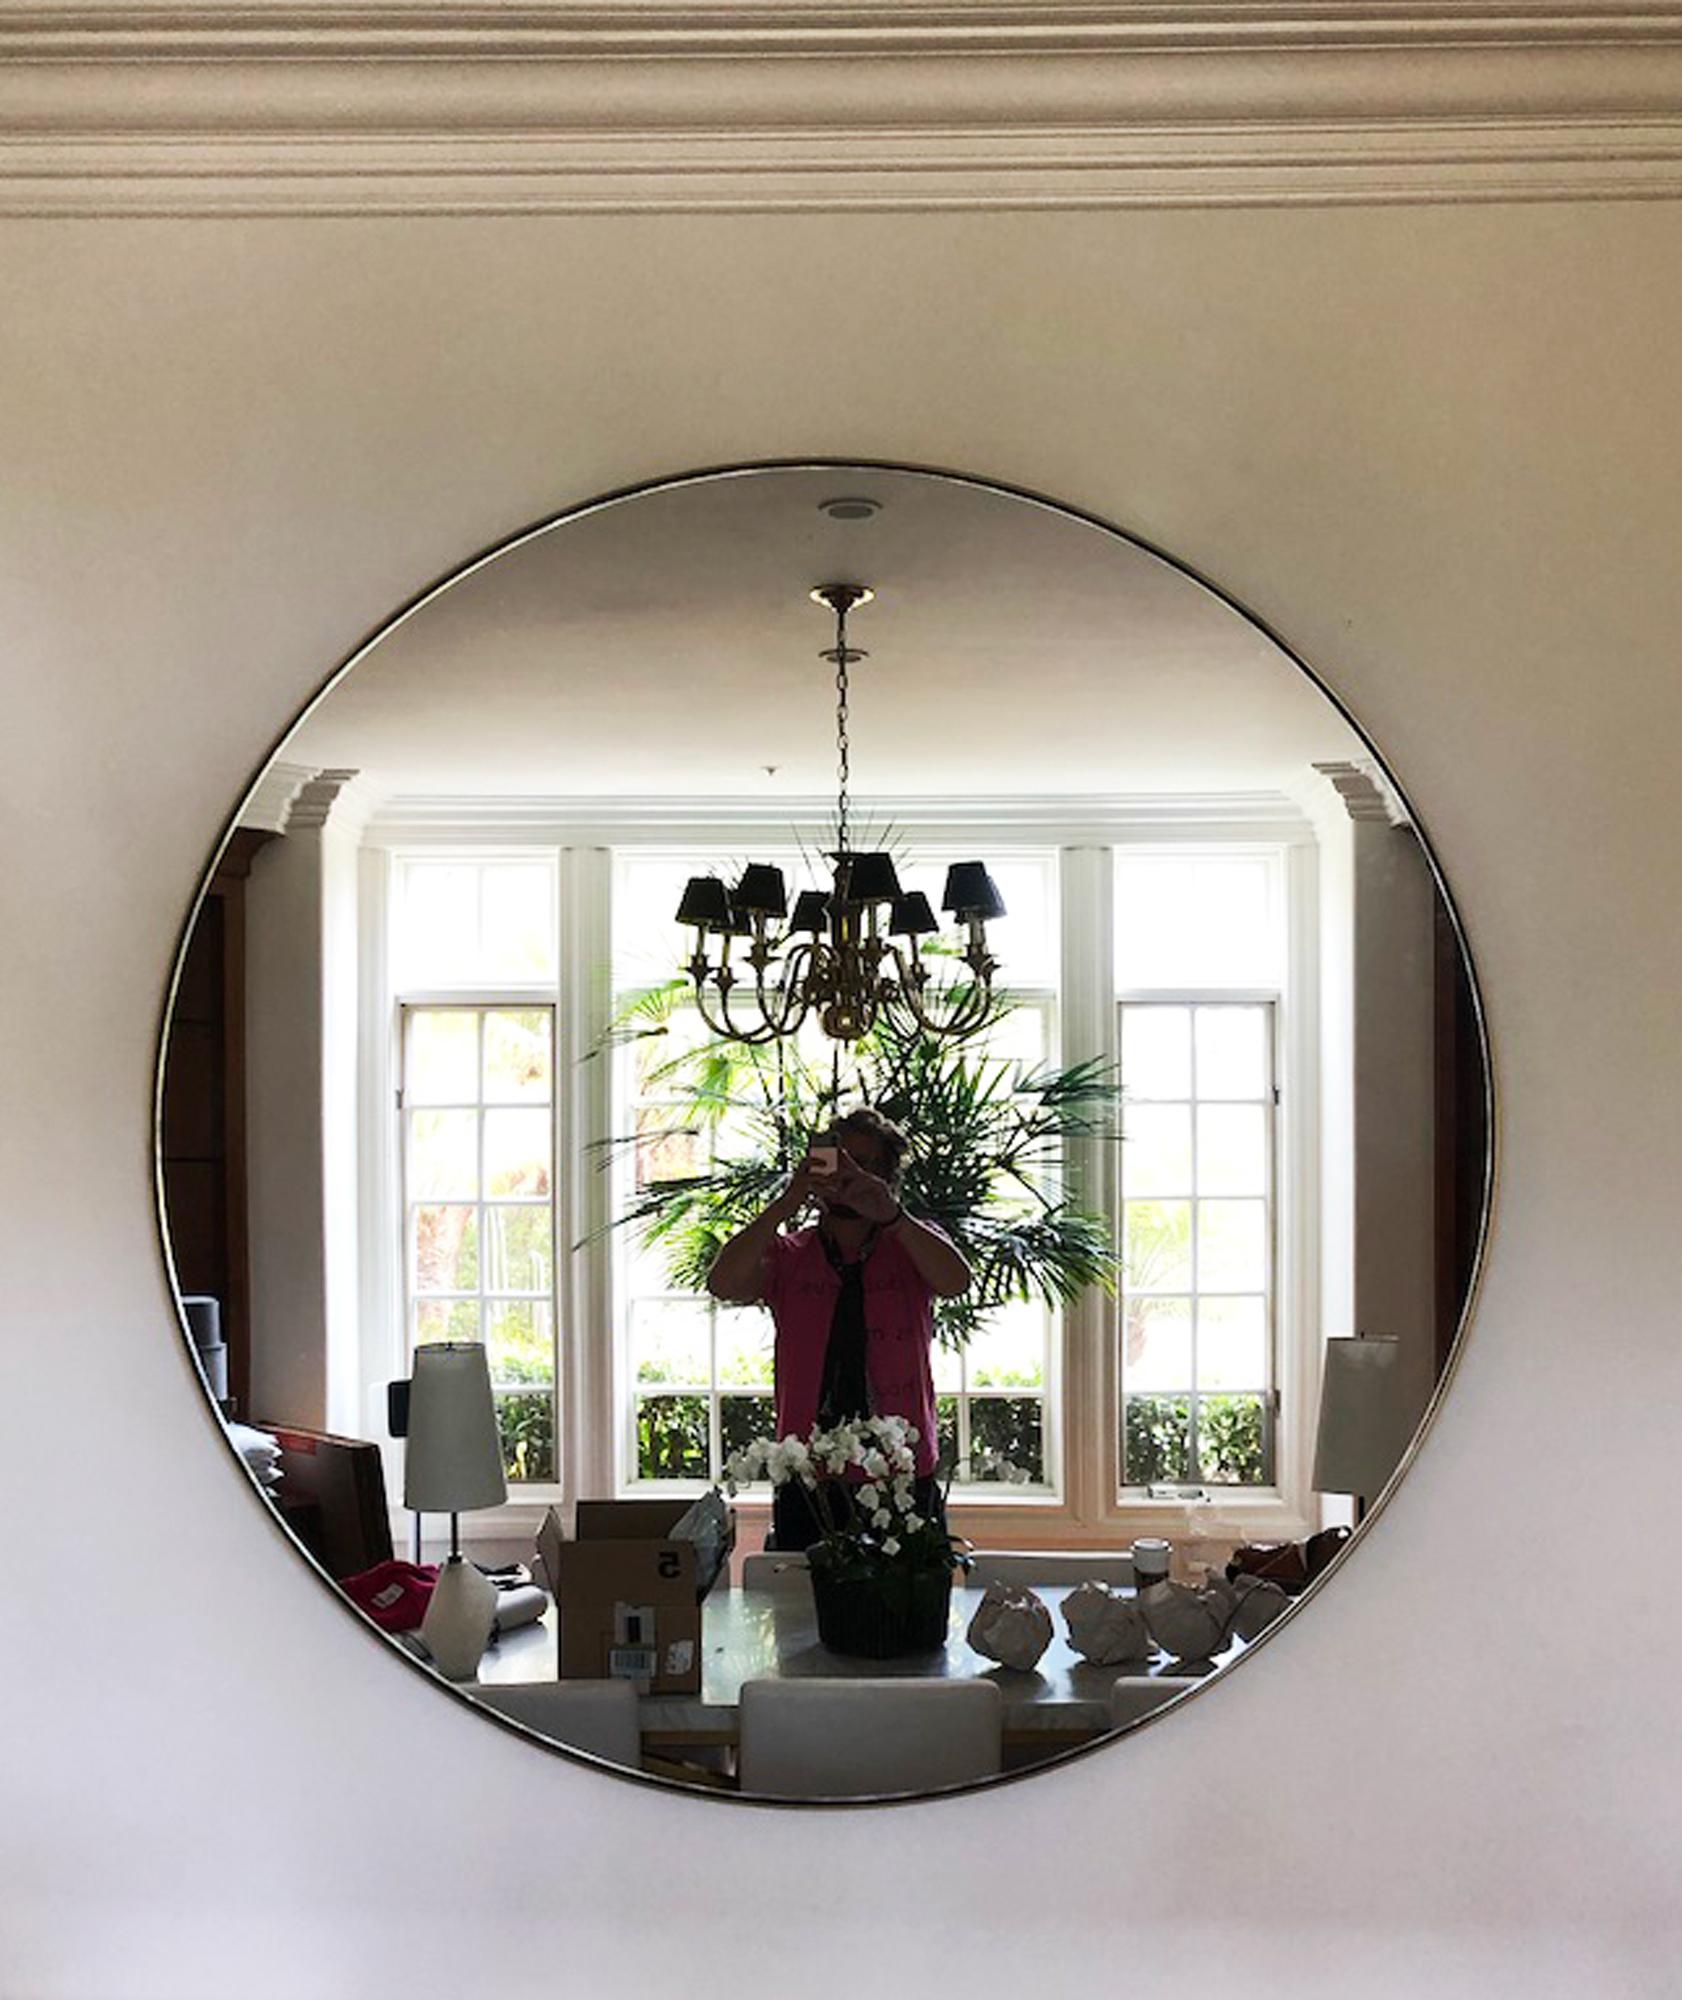 Spectacular large scale mirror
Minimal Beautiful in perfect condition
It will embellish any room what ever the era and stock era and style.